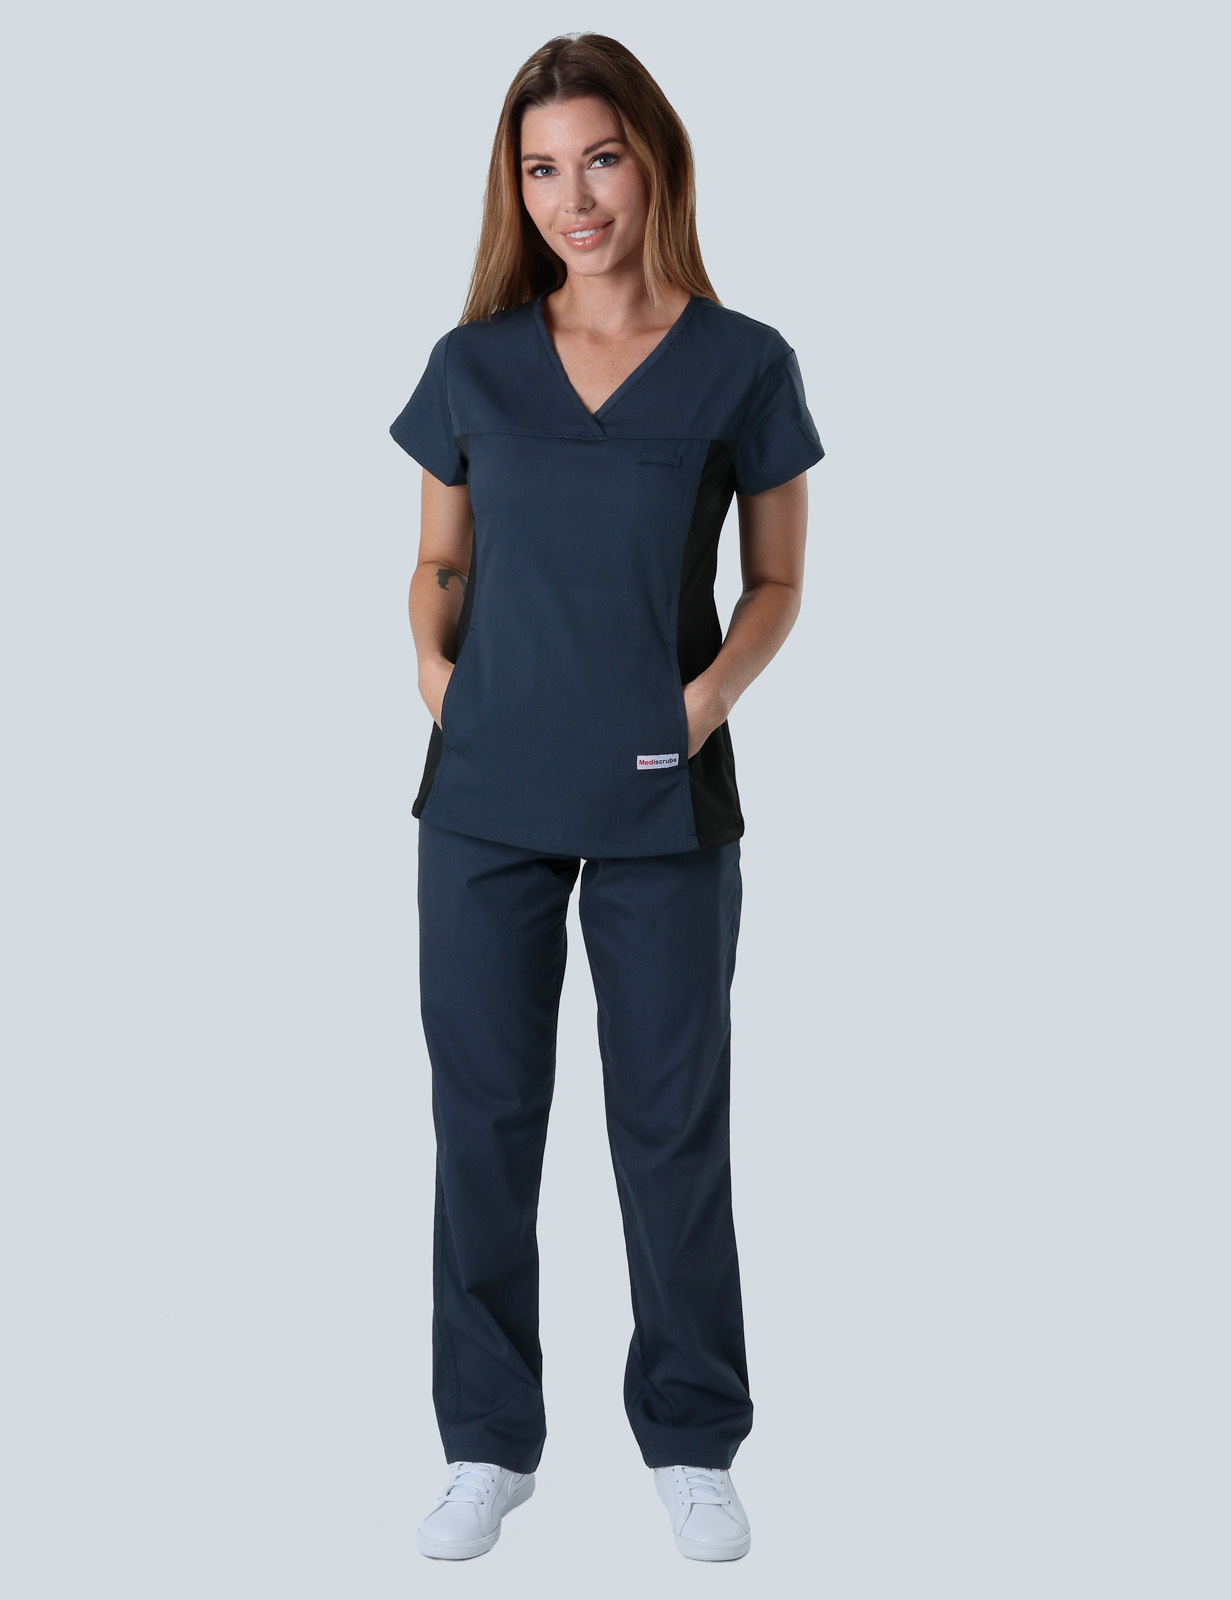 Women's Fit Solid Scrub Top With Spandex Panel - Navy - Medium